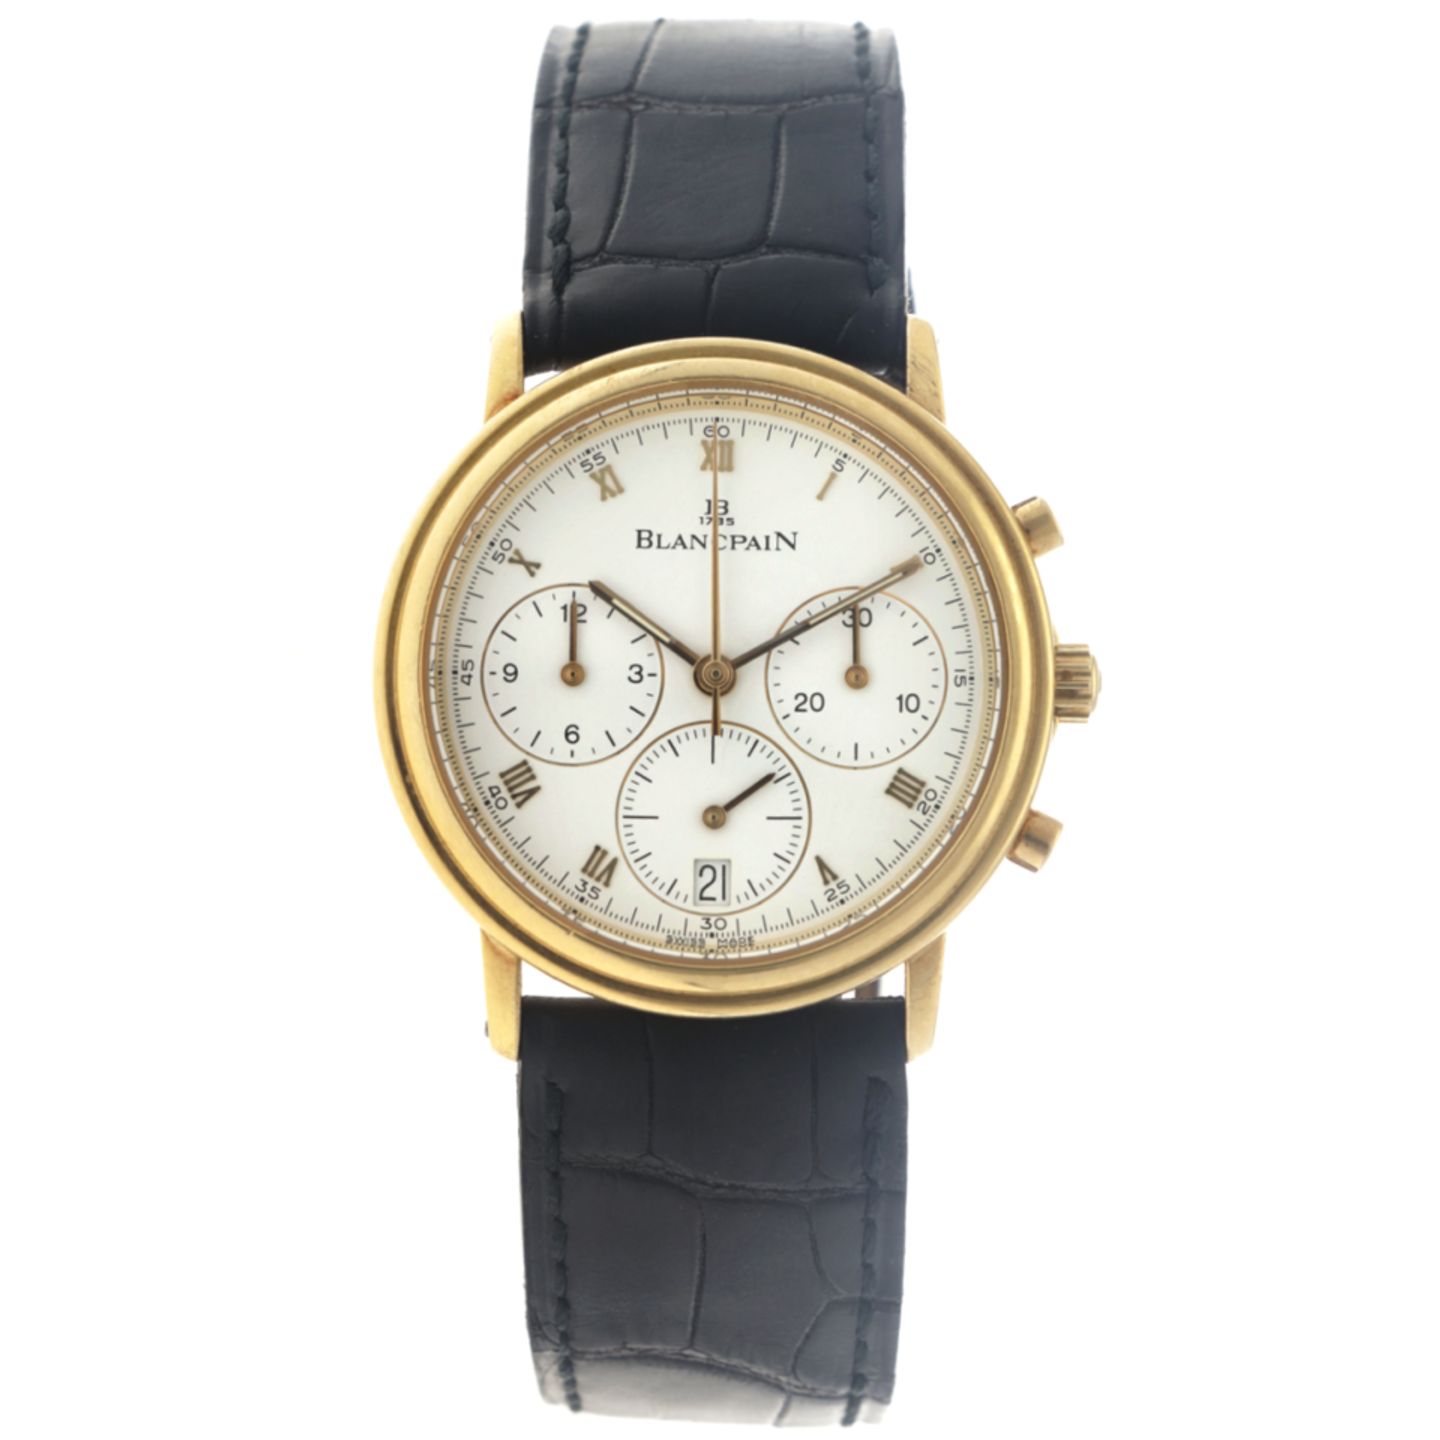 Blancpain Villeret 1185-1418-55 (Unknown (random serial)) - White dial 34 mm Yellow Gold case (1/6)